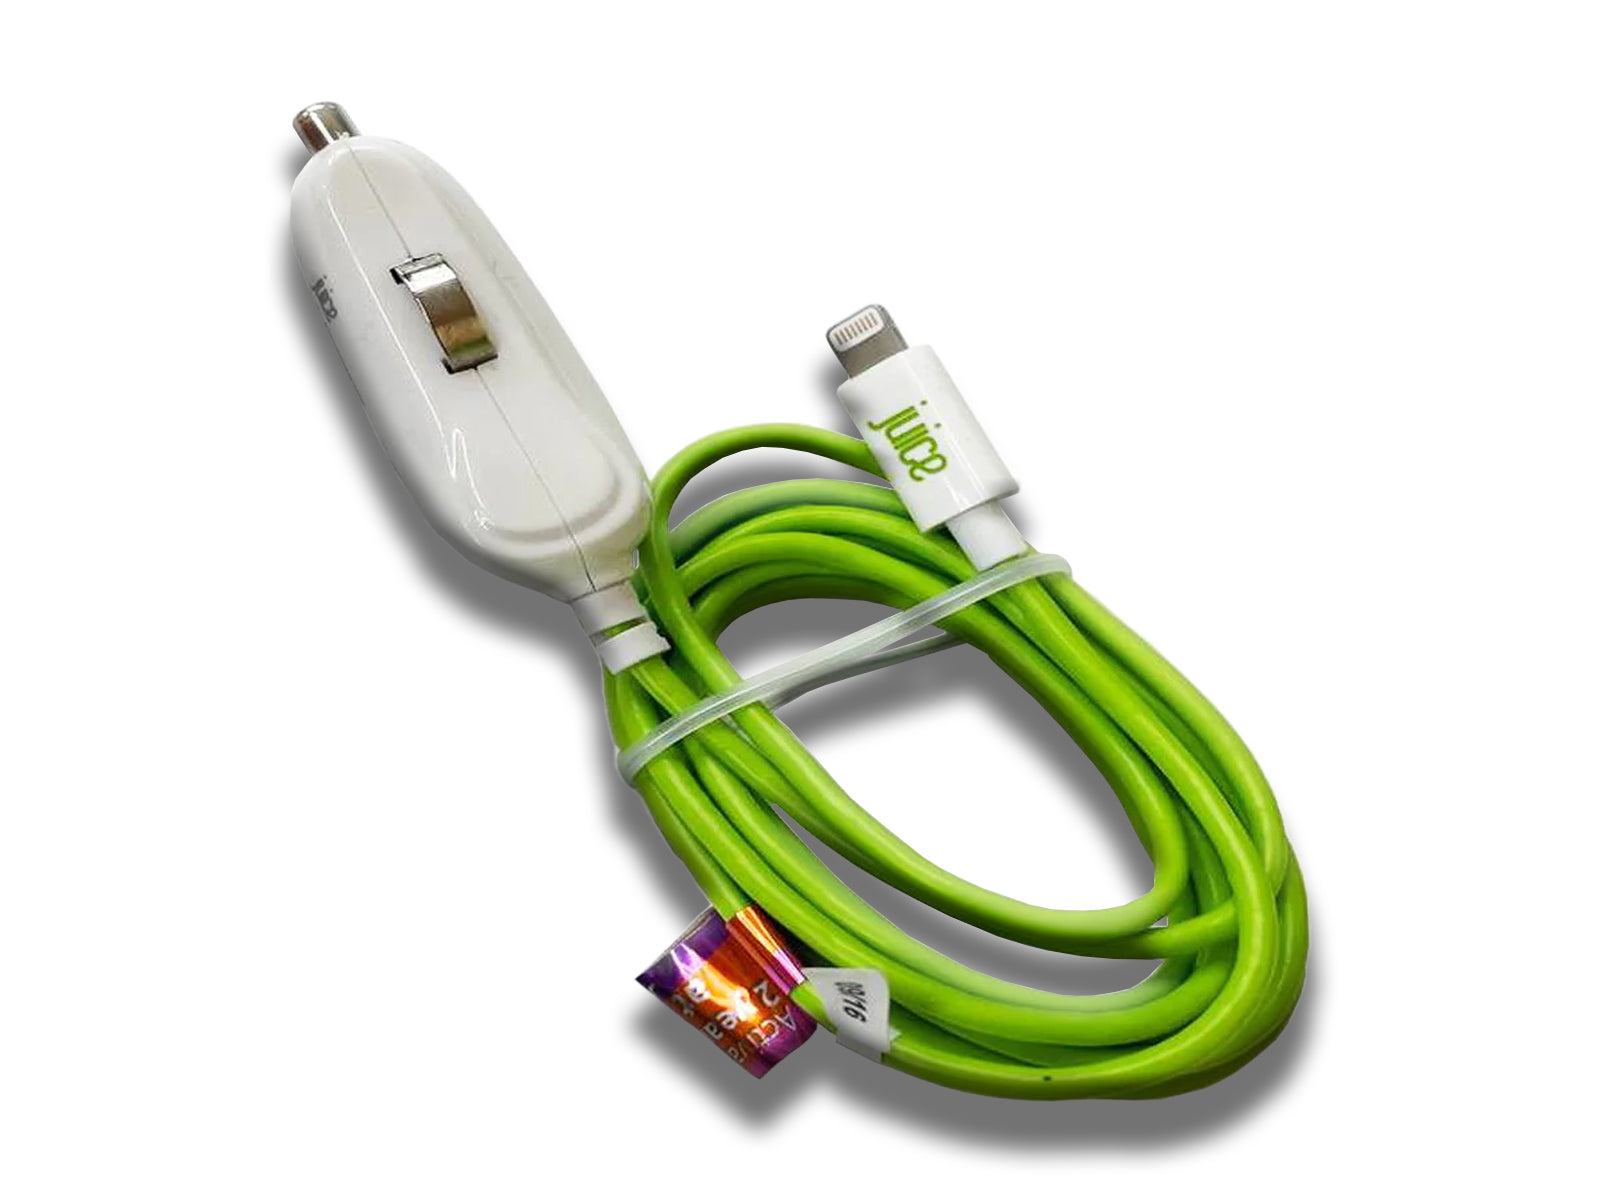 Juice Apple Lightning Car Cigarette Lighter Charger with Integrated Cable